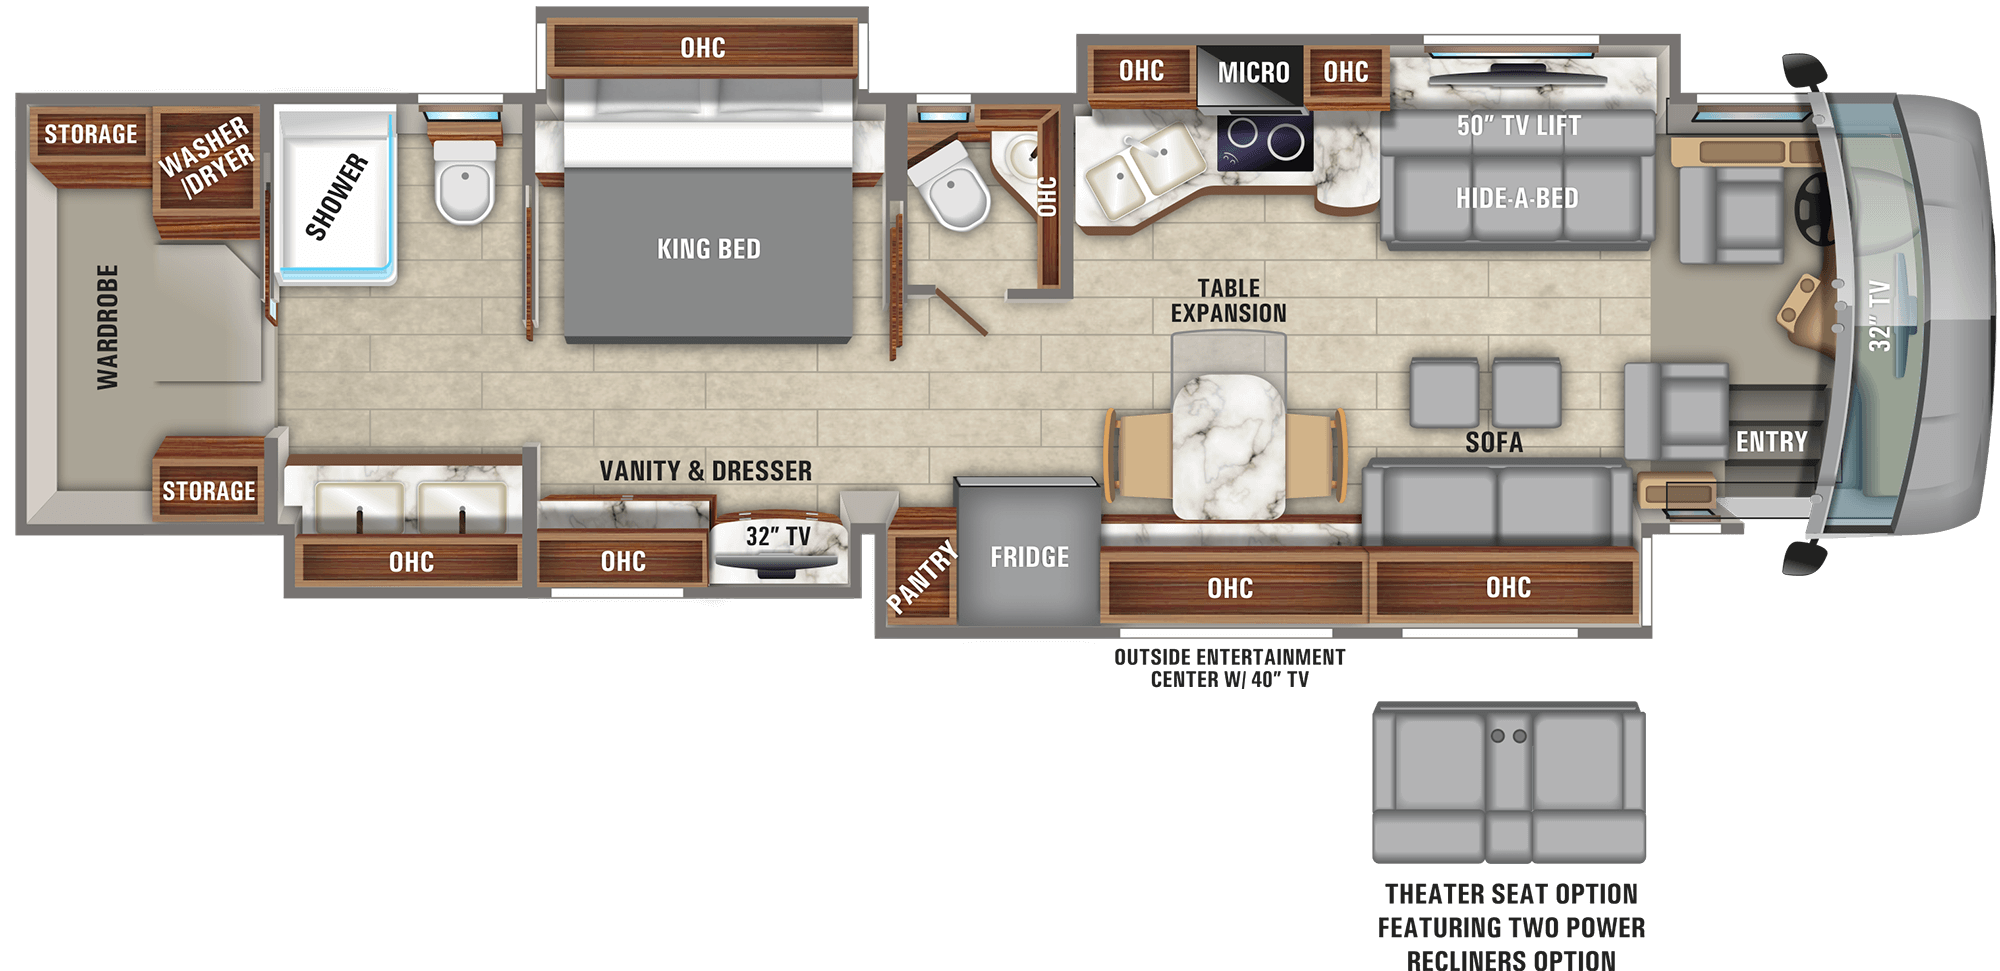 2 Bedroom Class A Motorhome Floor Plans Search your